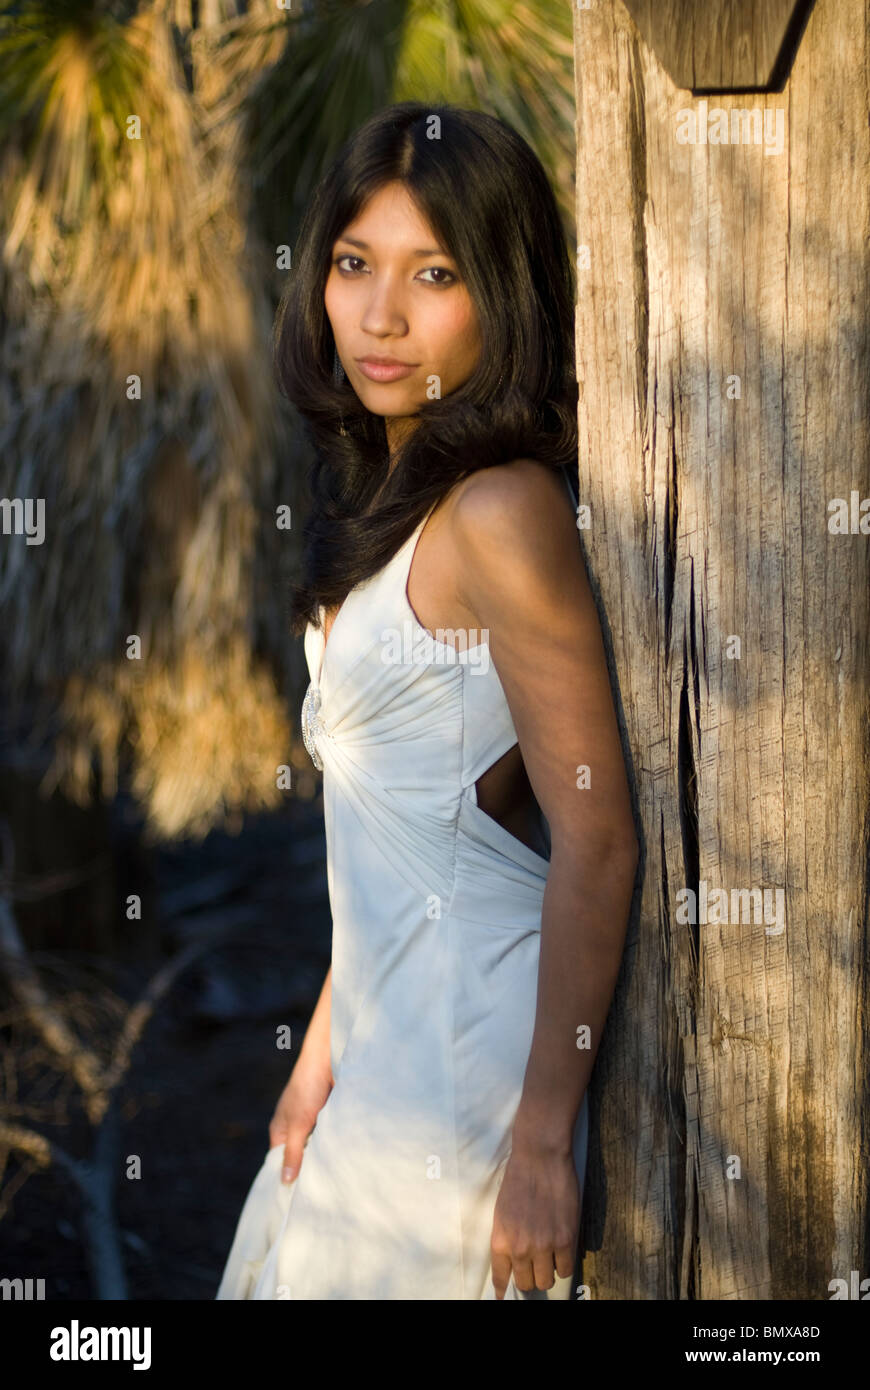 A young and very pretty mixed race woman is wearing a white formal dress  leaning on a wooden beam Stock Photo - Alamy